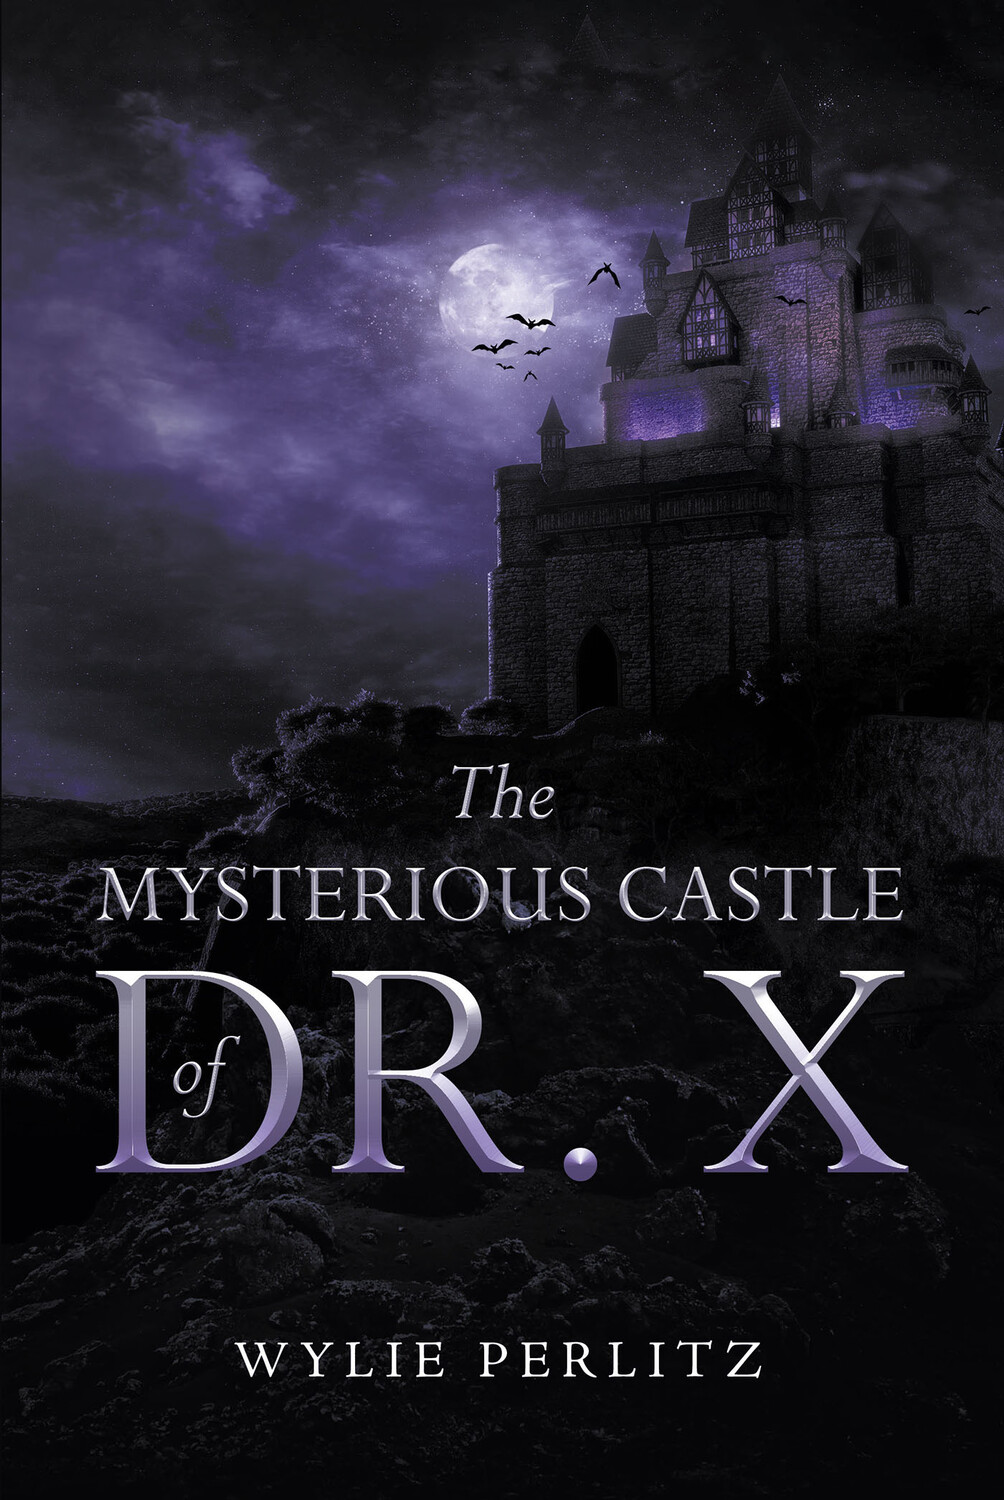 'The Mysterious Castle of Dr. X', by Wylie Perlit